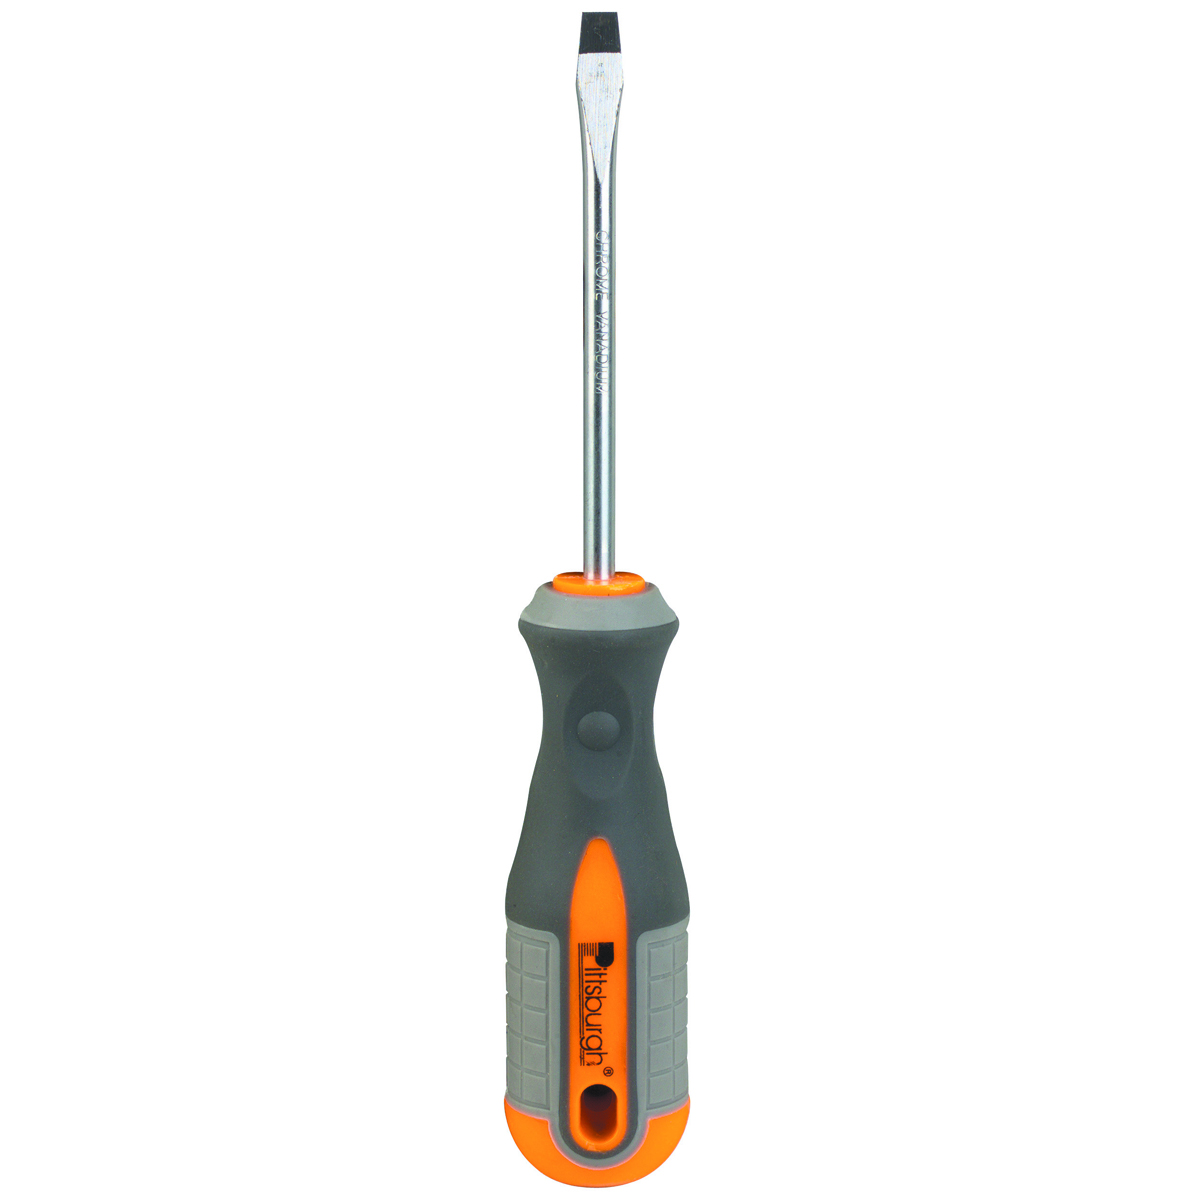 PITTSBURGH 1/4 in. x 4 in. Slotted Screwdriver - Item 94604